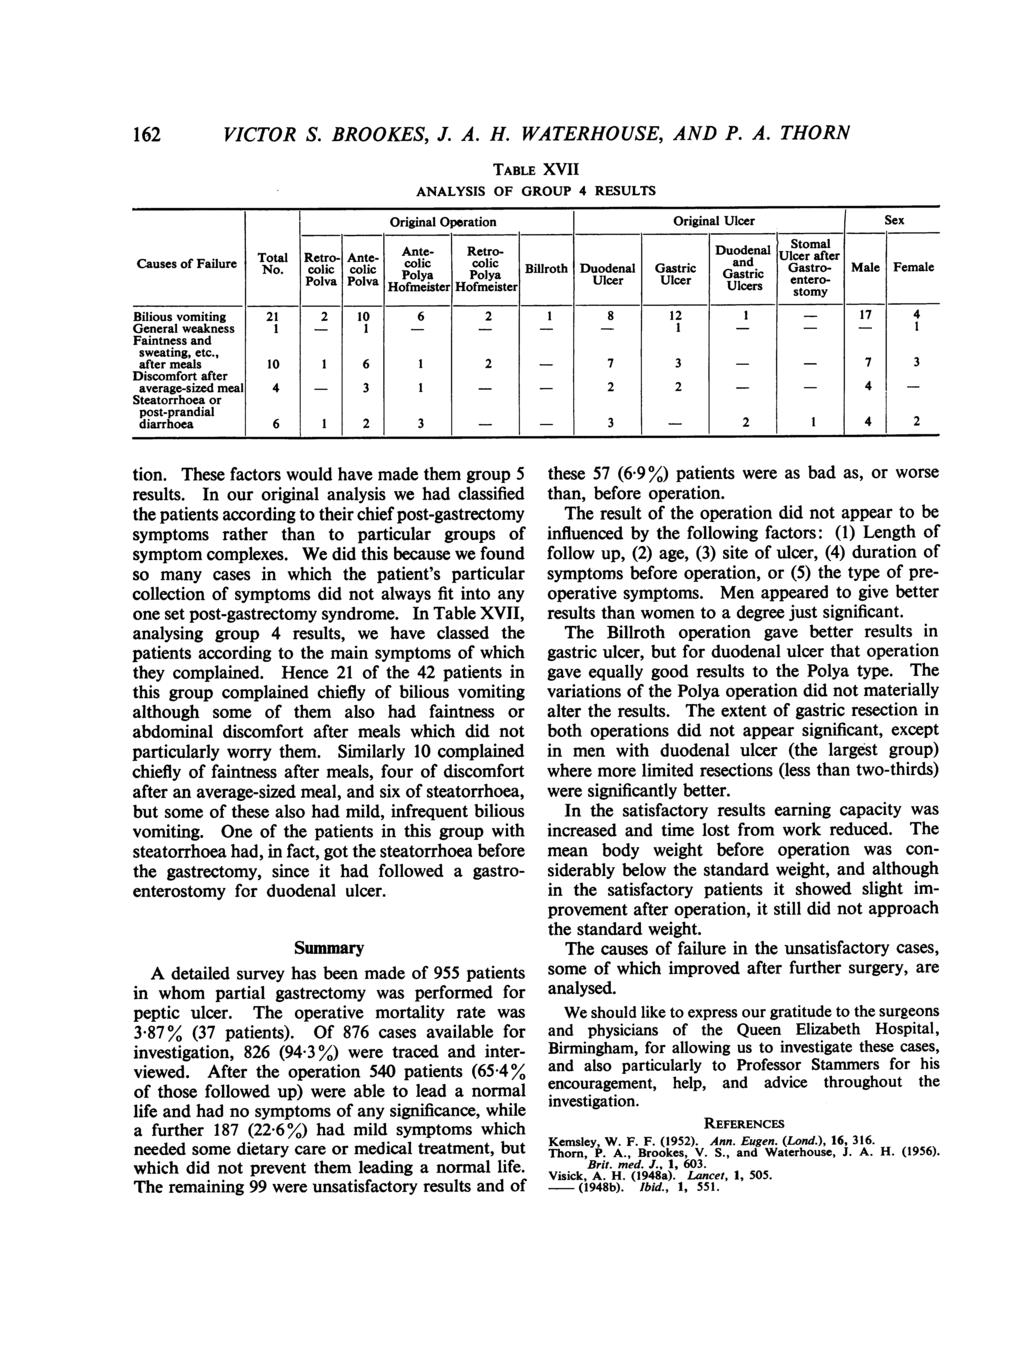 162 VICTOR S. BROOKES, J. A. H. WATERHOUSE, AND P. A. THORN TABLE XVII ANALYSIS OF GROUP 4 RESULTS Original Oporation Original Ulcer Sex Stomal Total Retro- Ante- Ante- Retro- Duodenal Ulcer after Causes of Failure No.